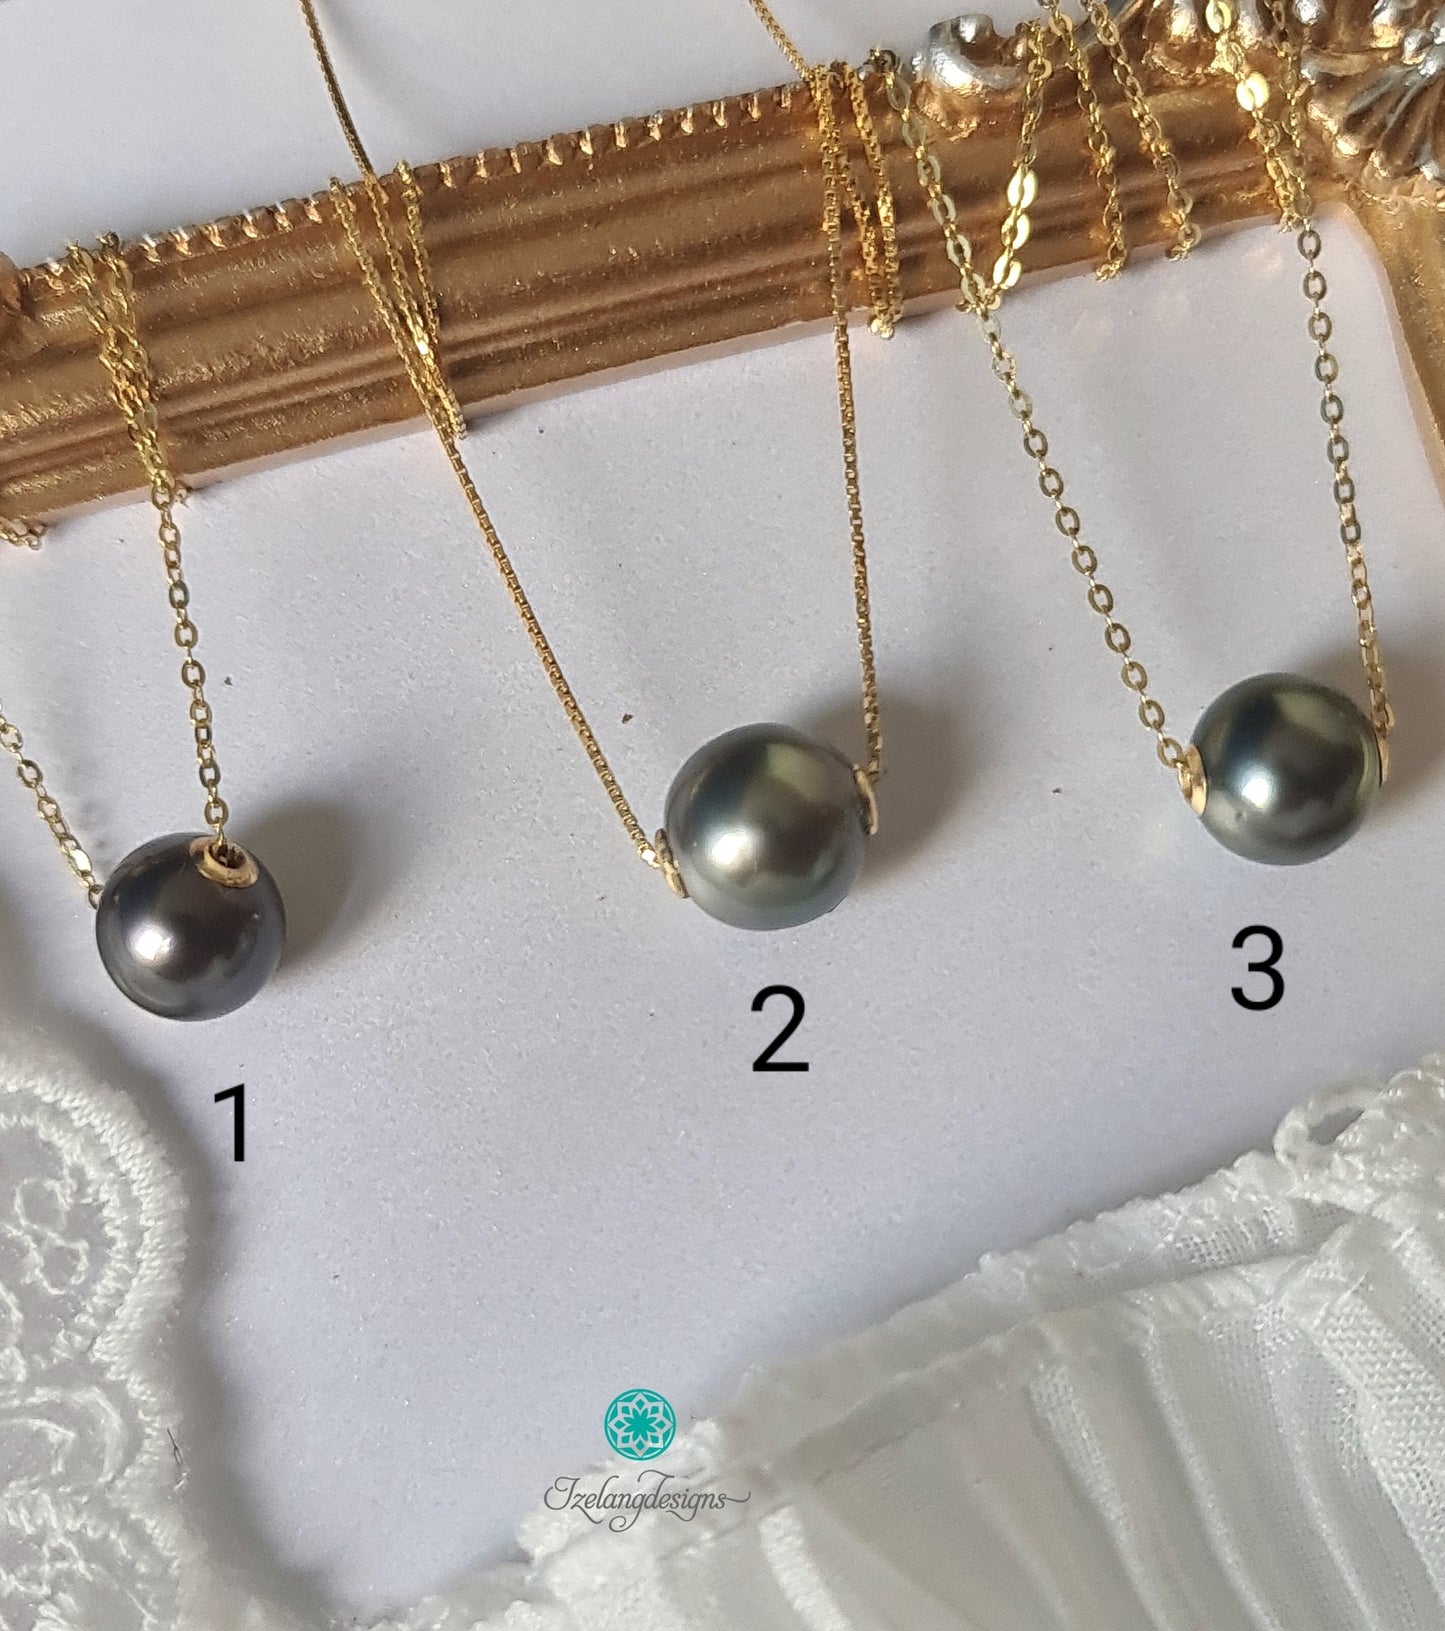 9-10mm Round Black Tahitian Pearl in 925 Sterling Silver Chain in gold plated-NEM013